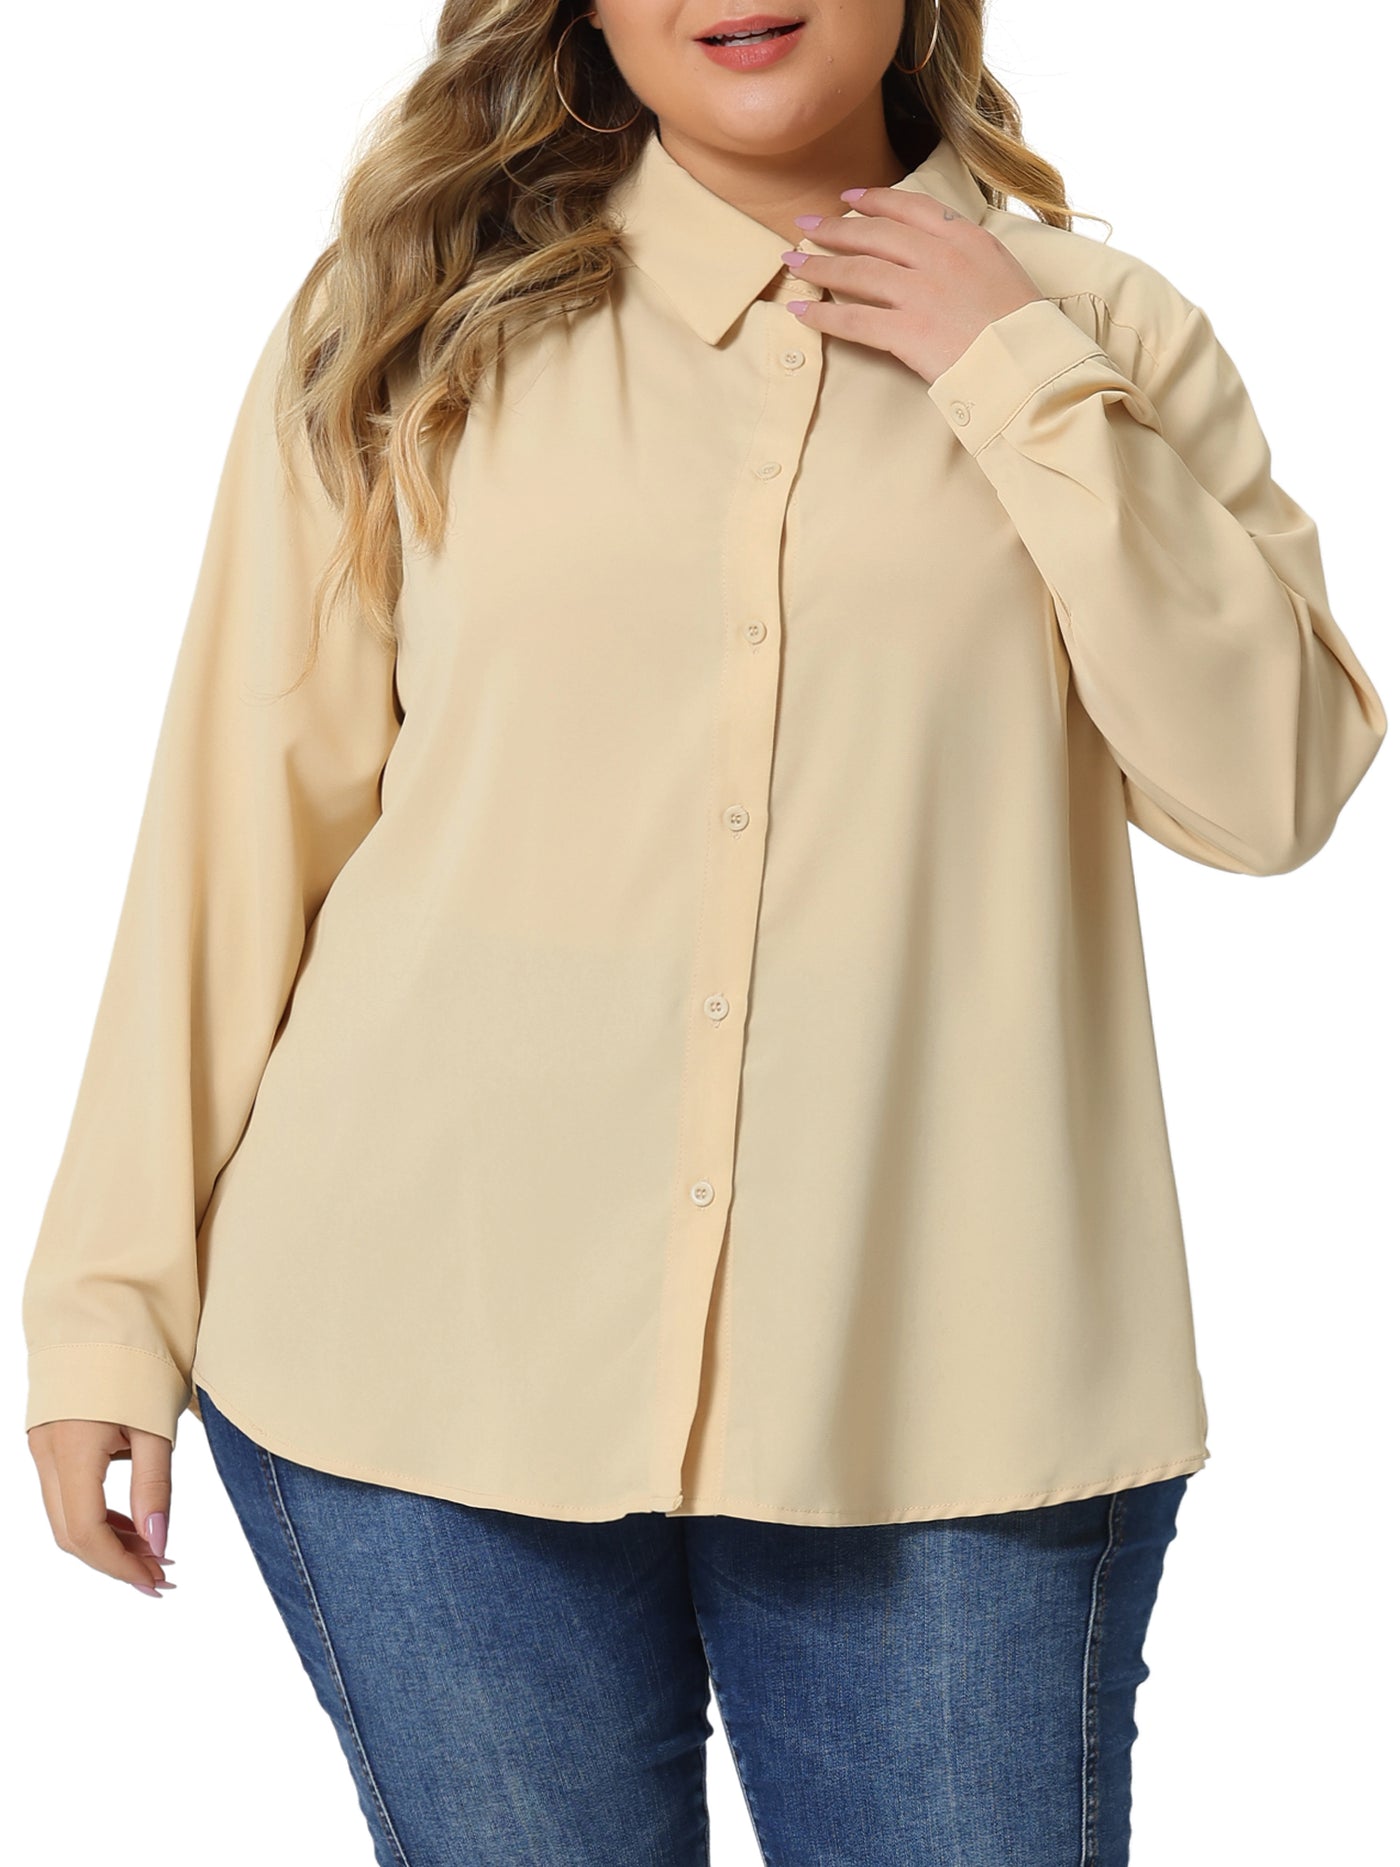 Bublédon Plus Size Chiffon Shirt for Women Long Sleeve Button Down Collared Business Office Blouses Tops